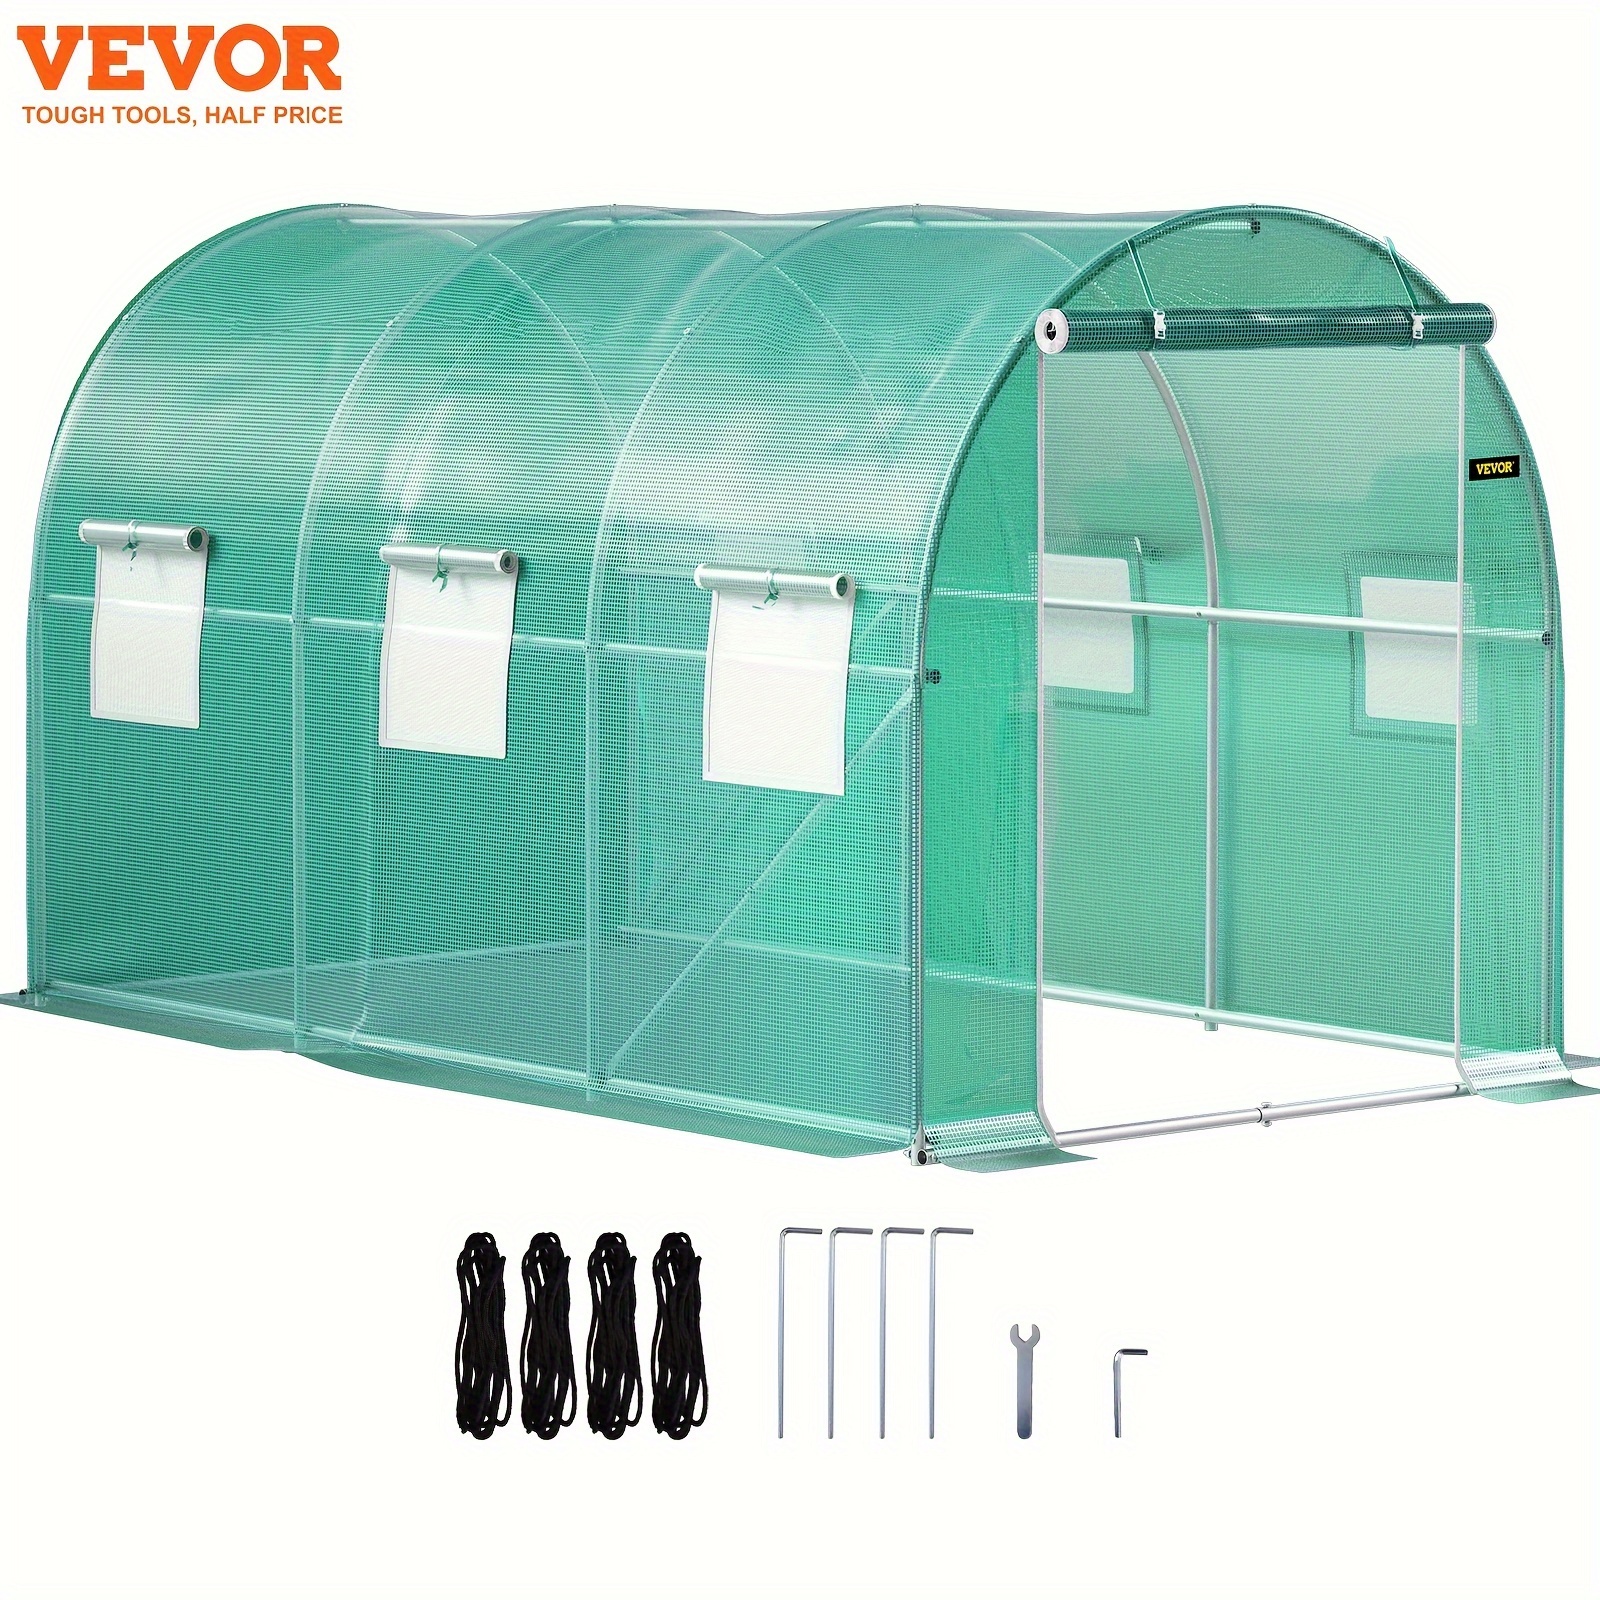 

Walk-in Tunnel Greenhouse, 12 X 7 X 7 Ft Portable Plant Hot House W/ Galvanized Steel Hoops, 1 Top Beam, Diagonal Poles, Zippered Door & 6 Roll-up Windows, Green